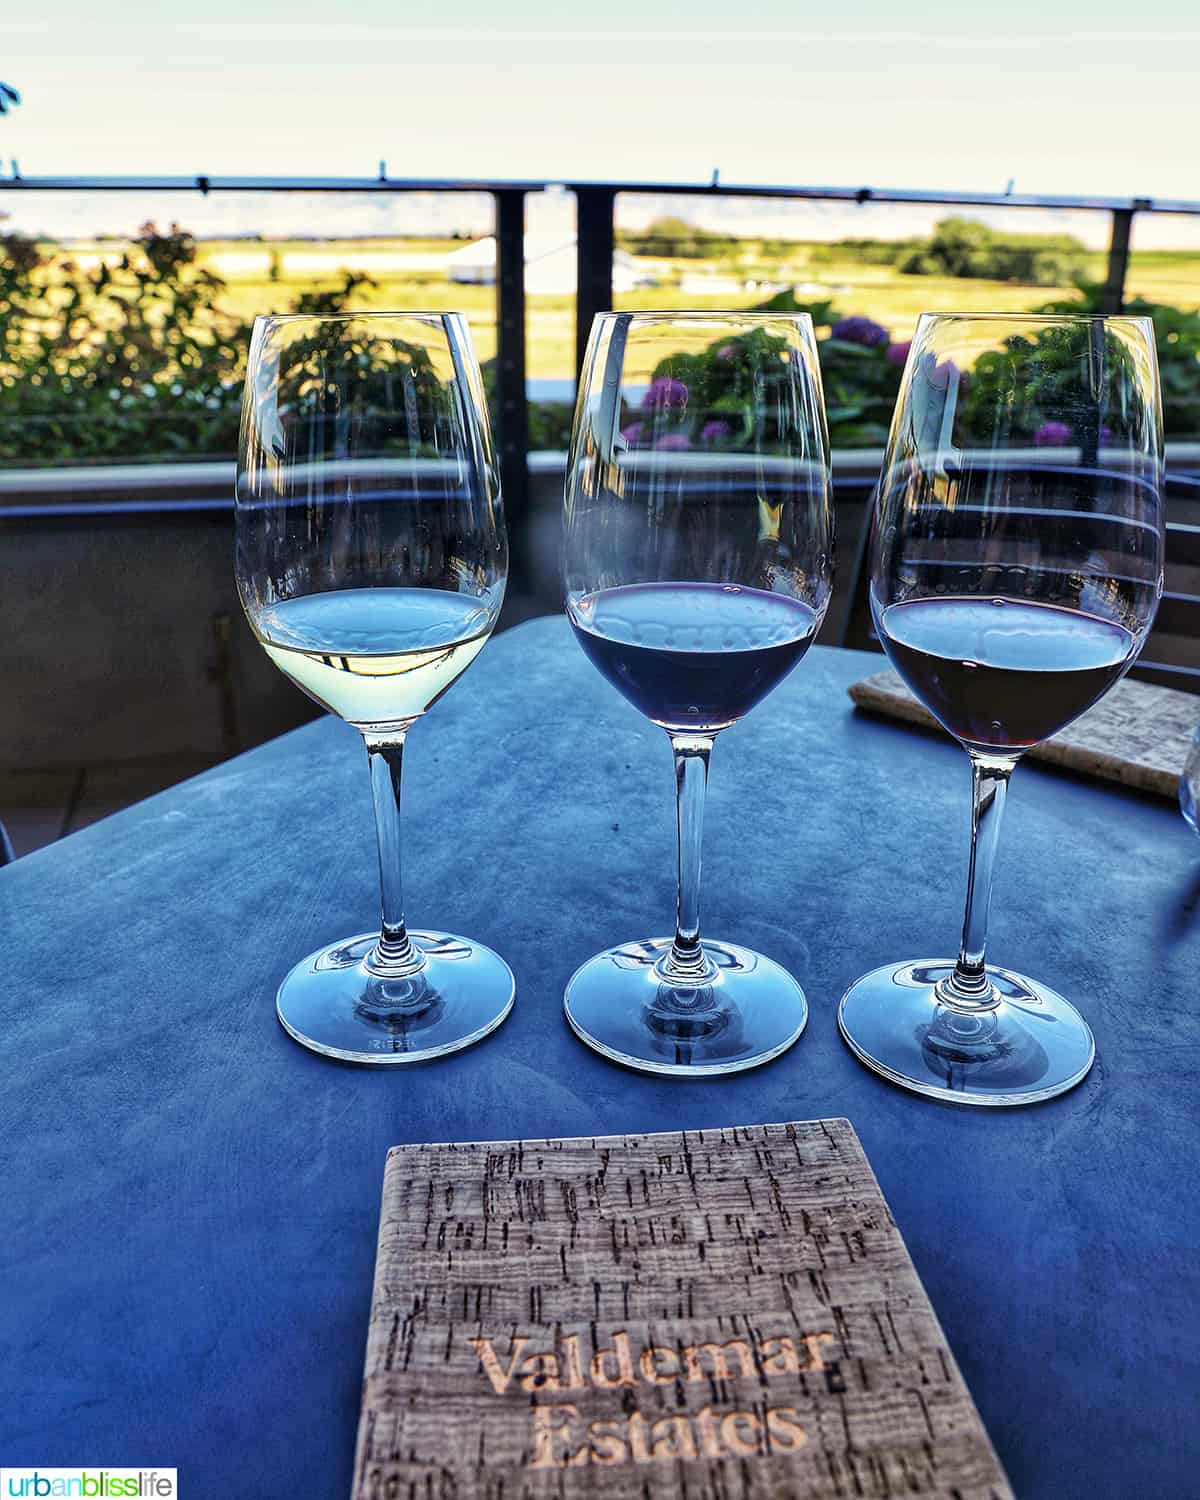 three wine glasses with a tasting menu on a table with view of Walla Walla Blue Mountains in the background.